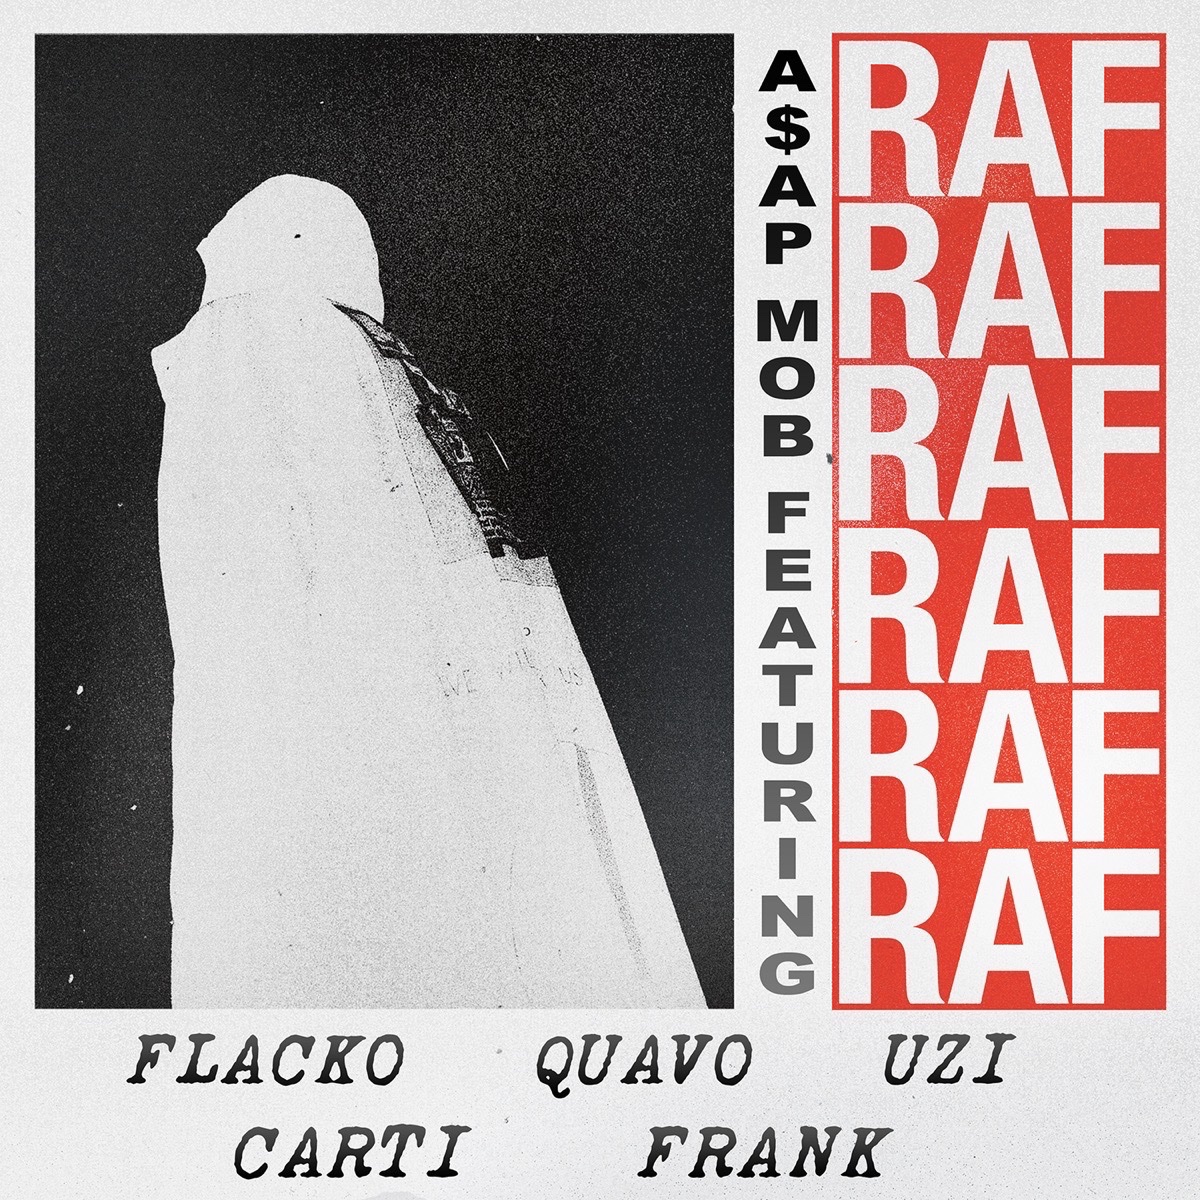 7 years ago today, A$AP Mob released 'RAF' featuring A$AP Rocky, Quavo, Lil Uzi Vert, Playboi Carti and Frank Ocean.